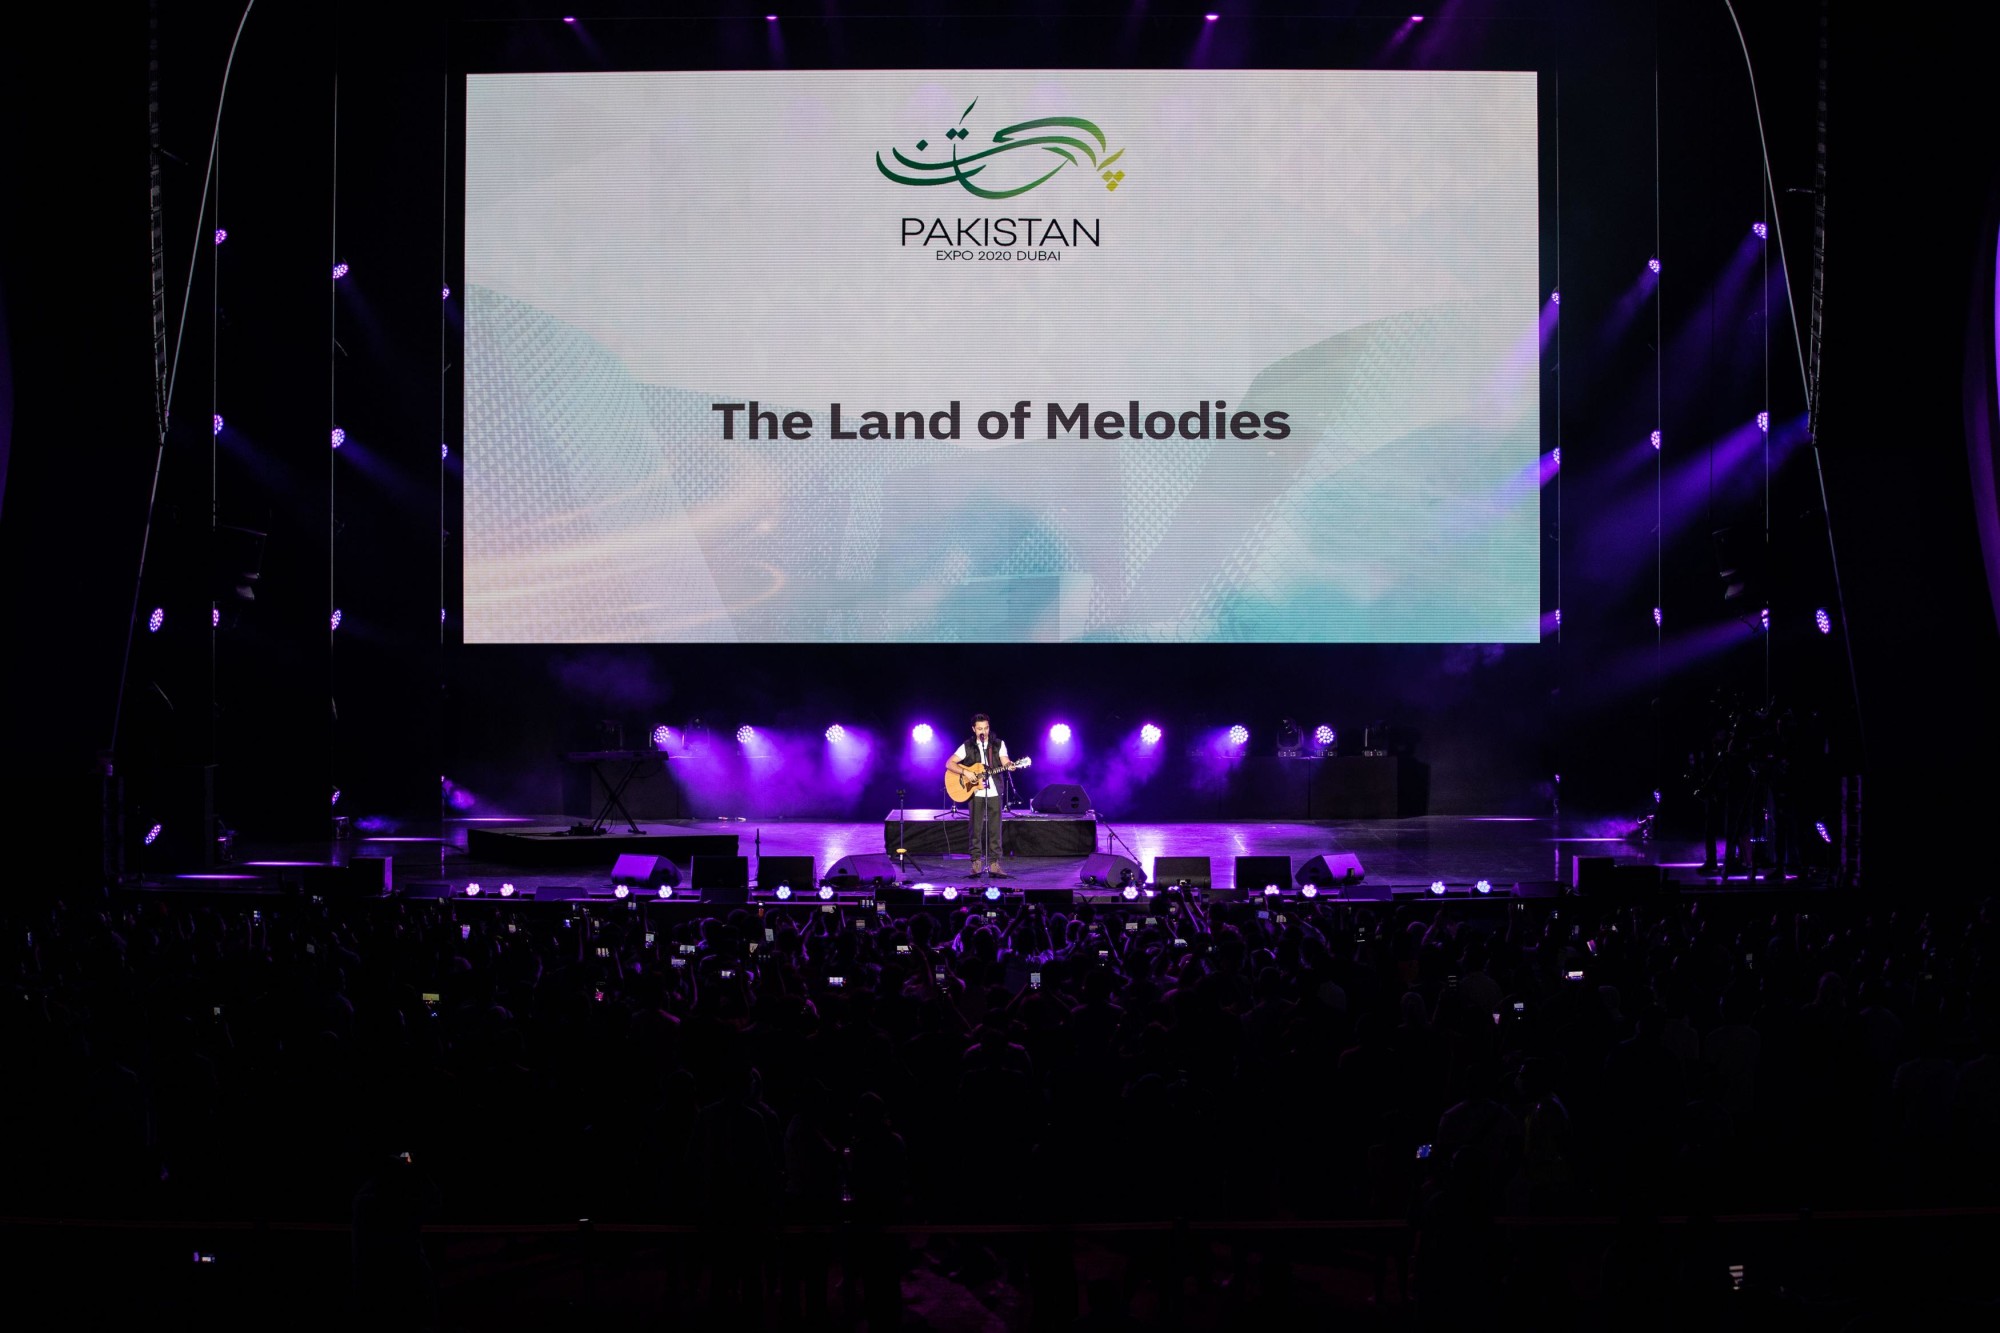 Land of melodies